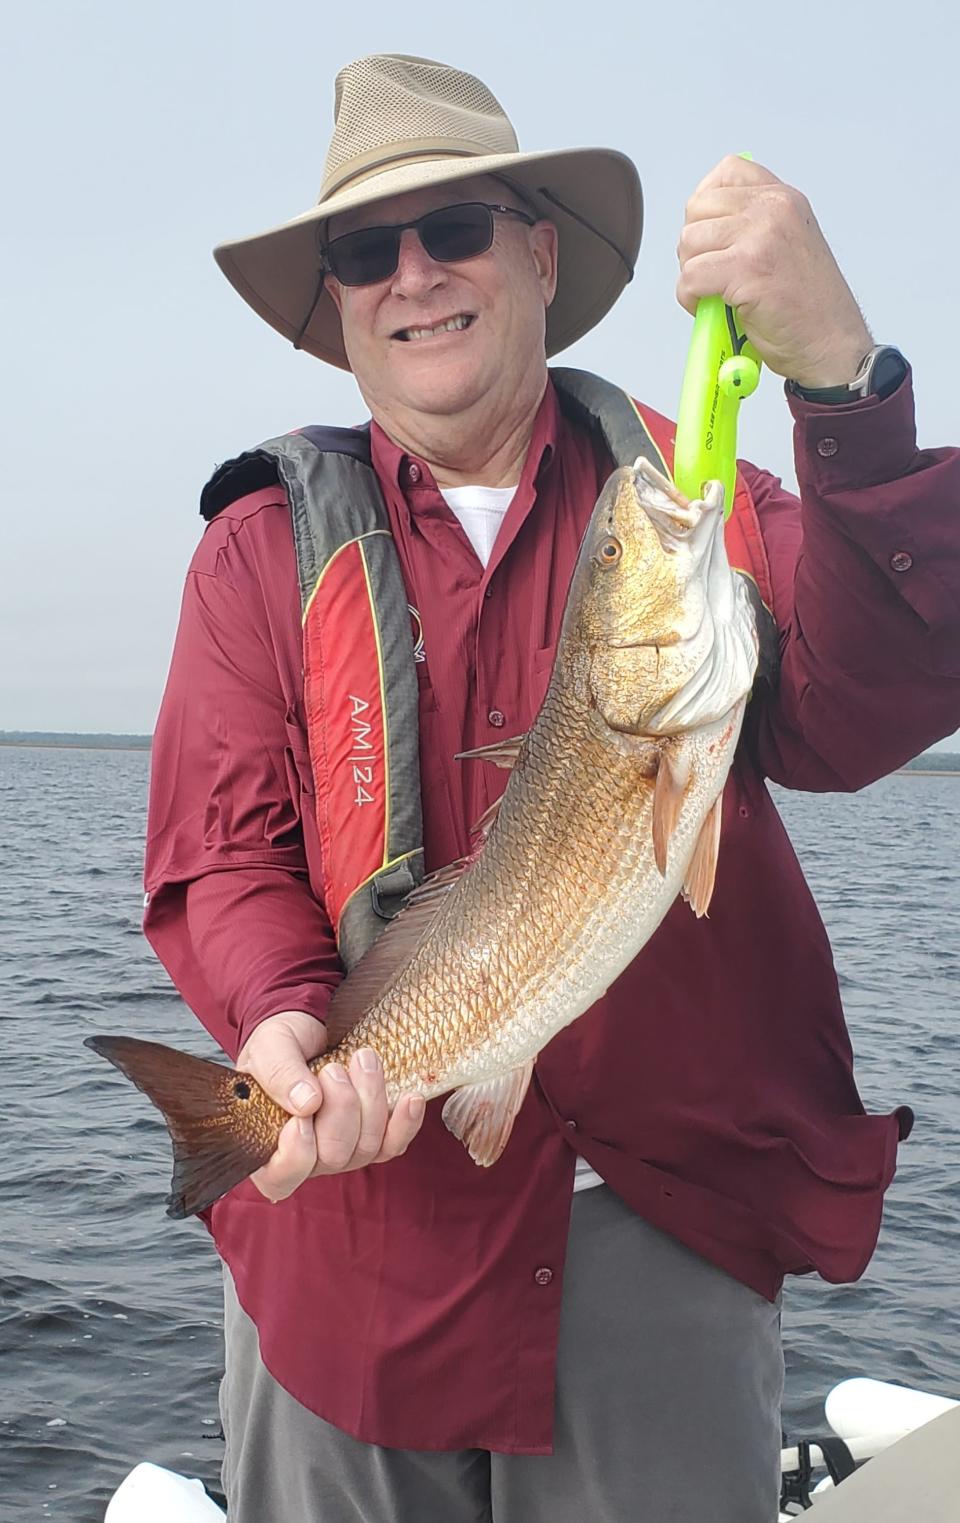 Steve McNally got to experience a light tackle thrill while catching his "first" ever redfish, a fat 24" bronze beauty.